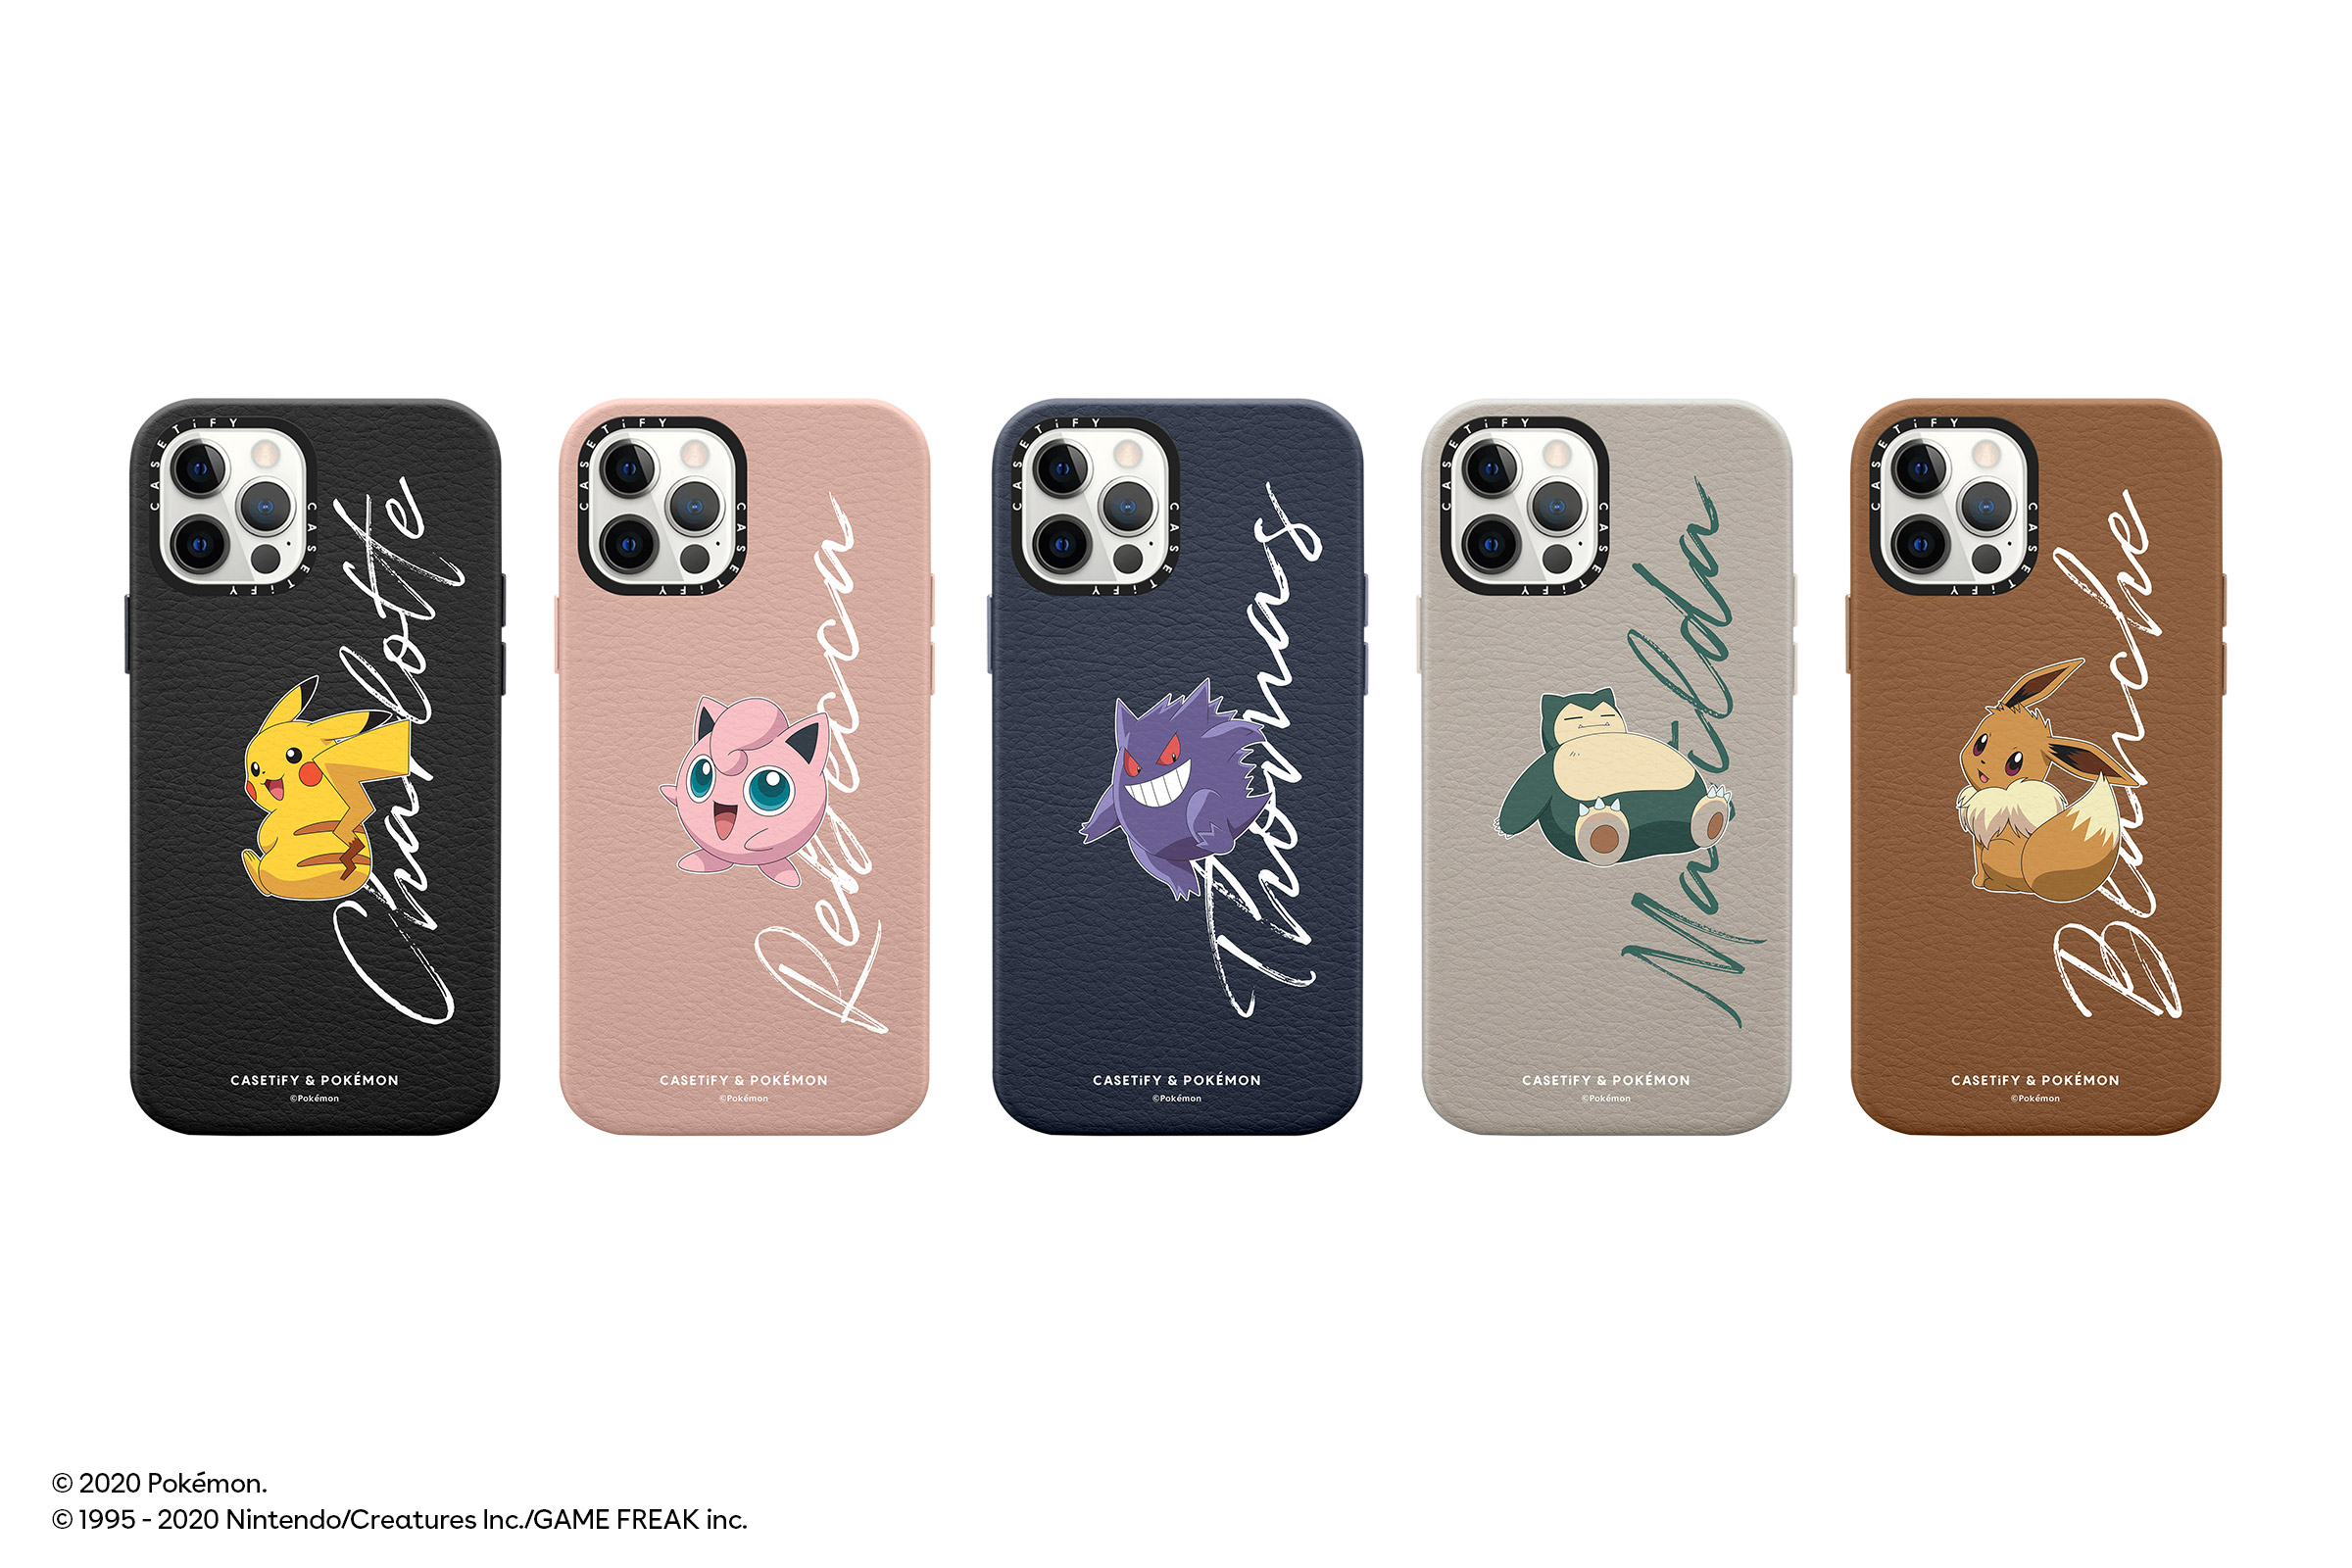 Drop 2 in CASETiFY x Pokémon’s “Past, Present, and Future” collection ...